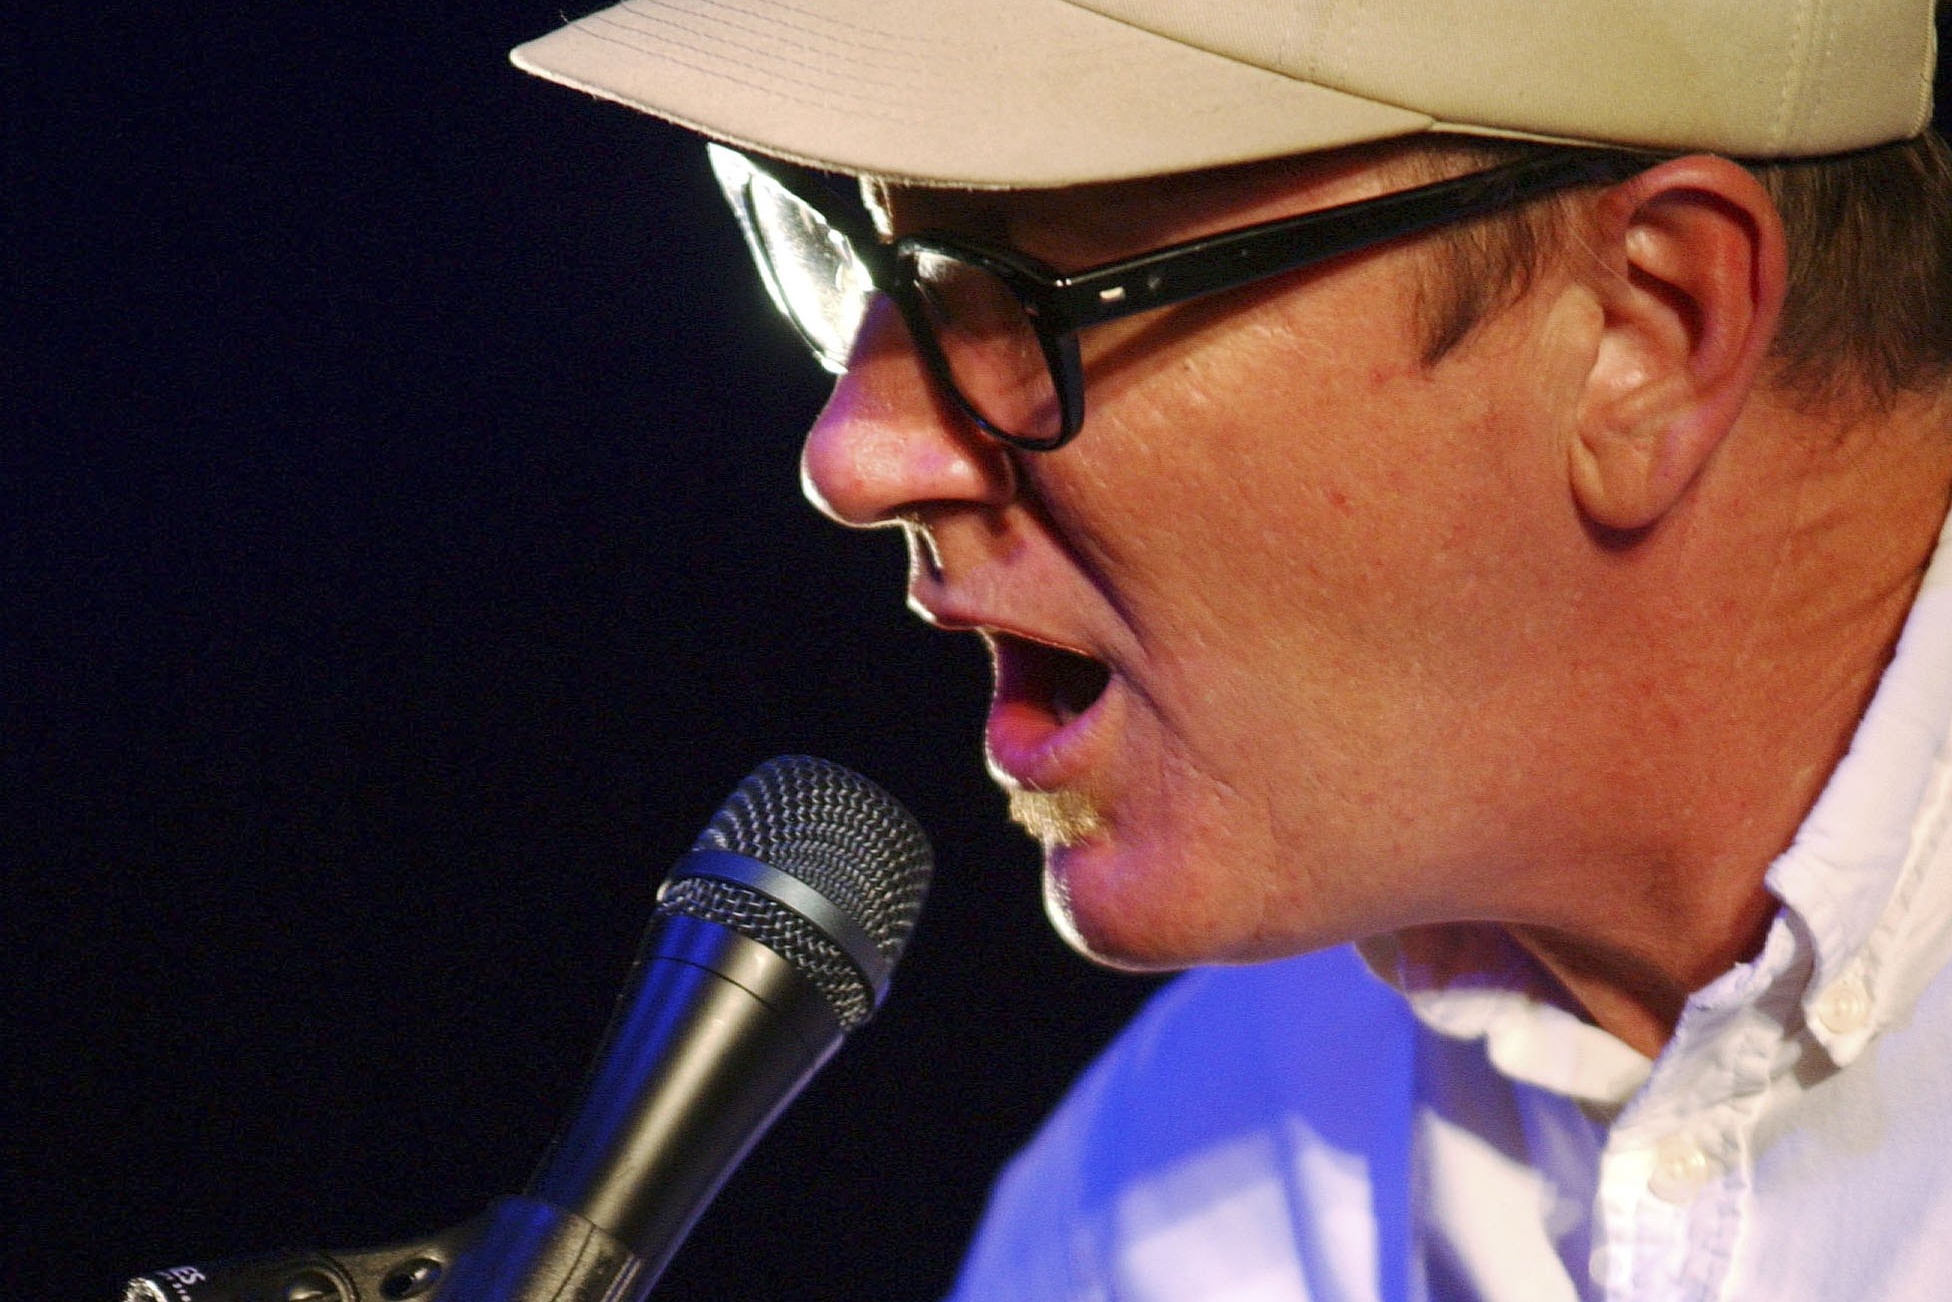 Review: Lambchop’s <i>This (Is What I Wanted to Tell You)</i> Is a Humble Triumph of Autotune